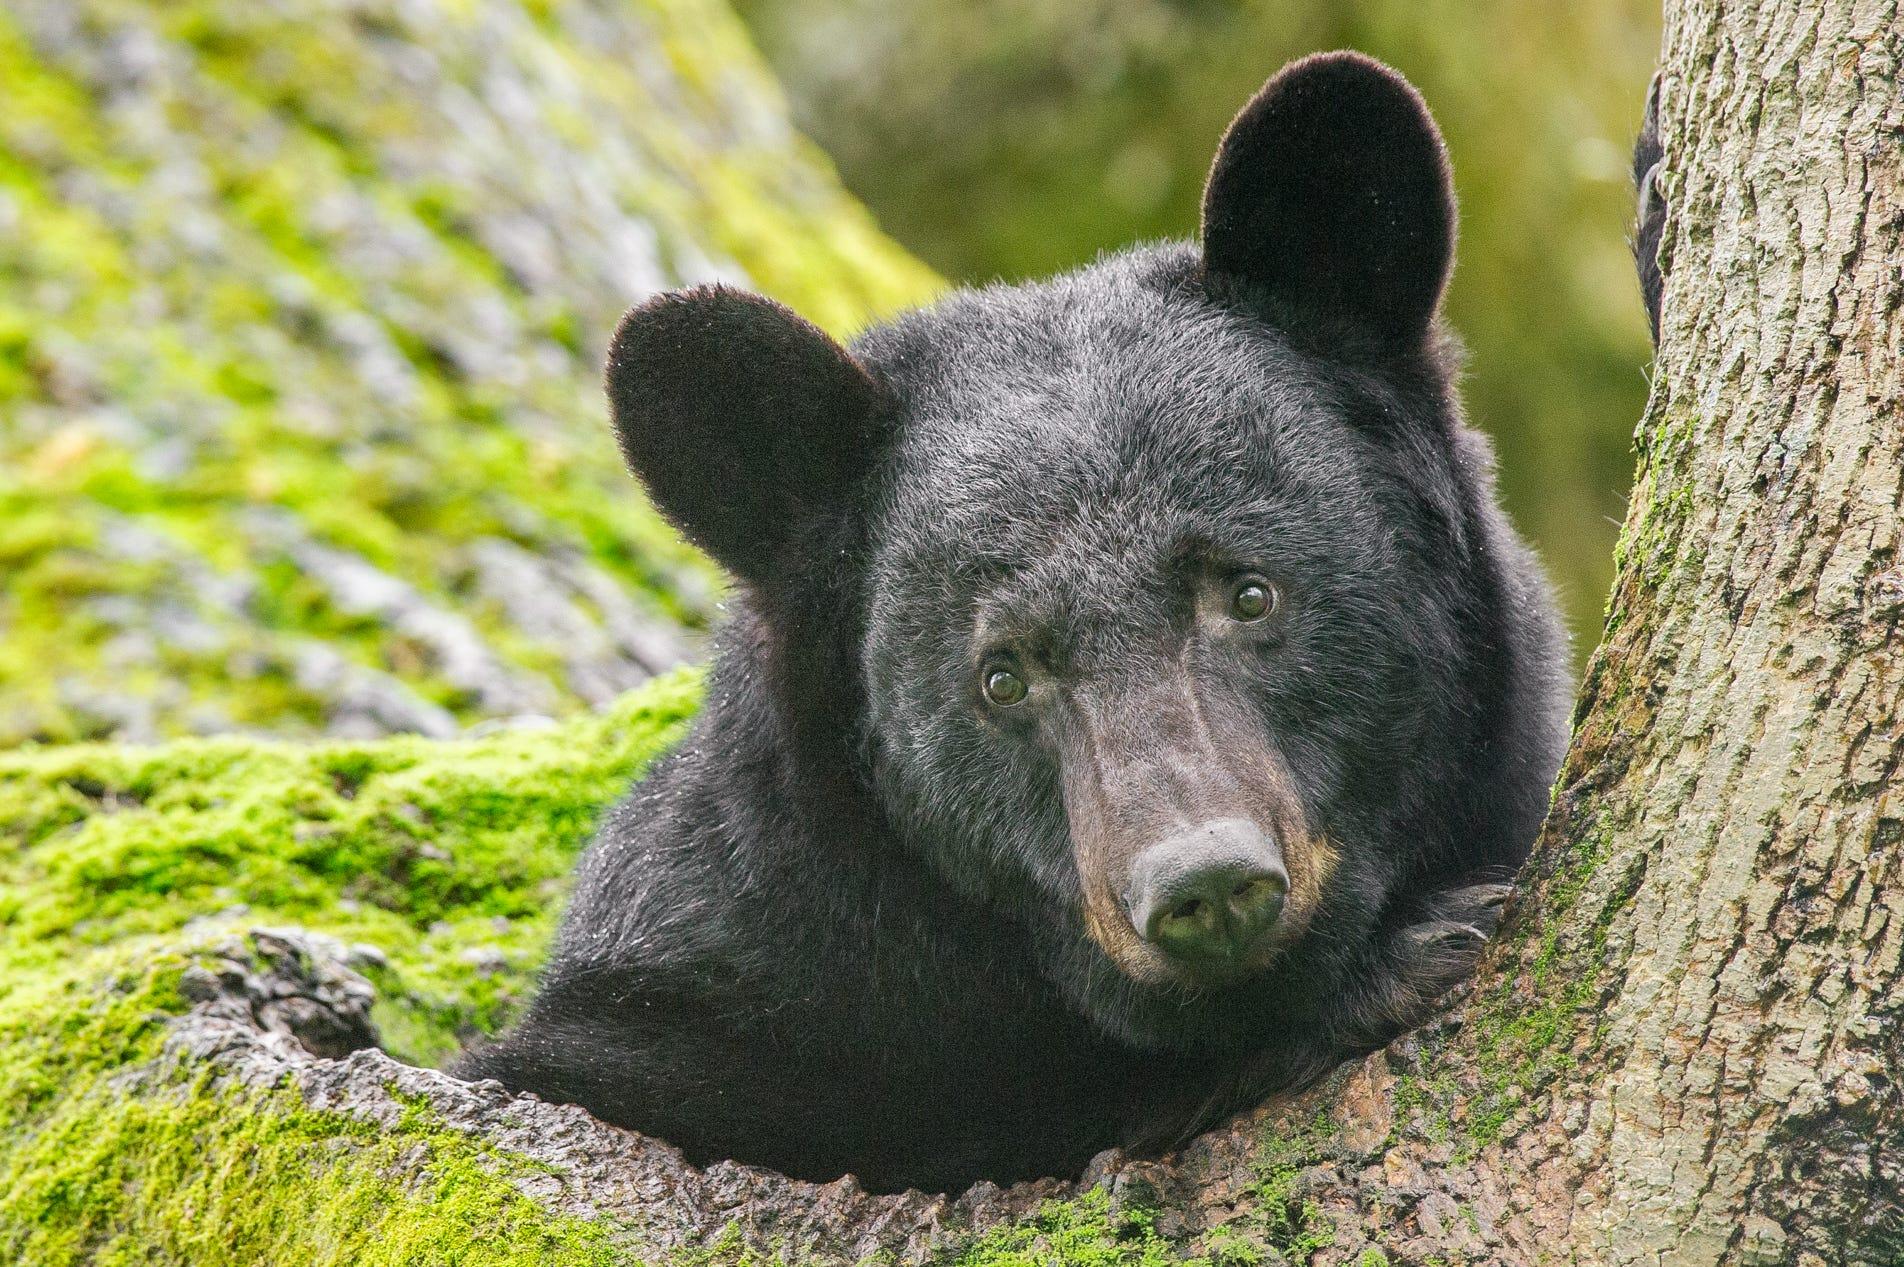 The North Carolina Wildlife Resources Commission is proposing extending bear hunting season.